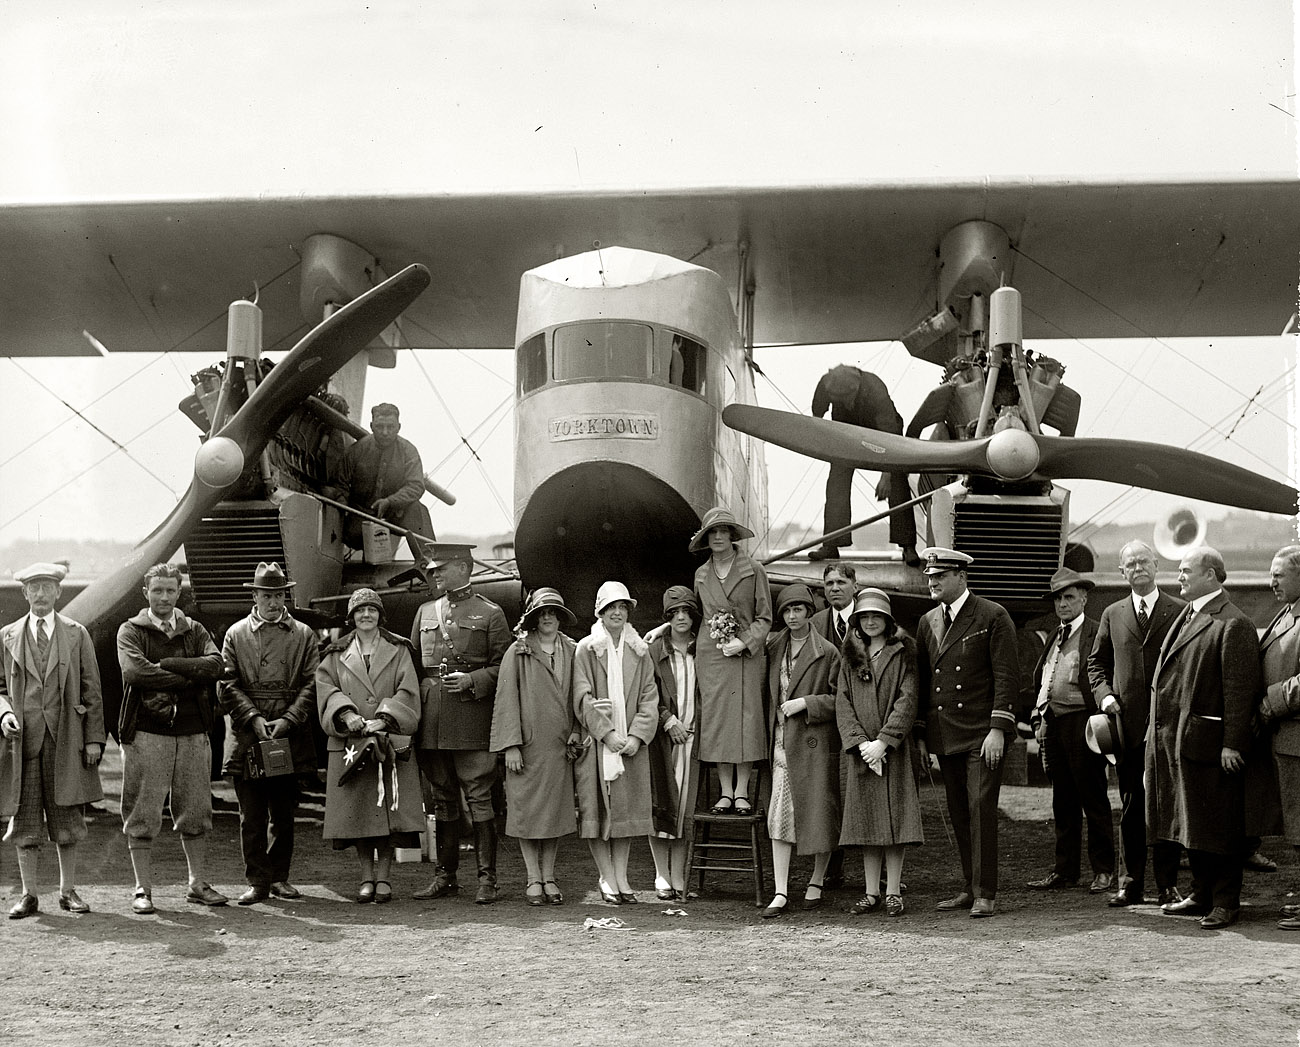 May 8, 1925. Washington, D.C. " 'Yorktown.' Christening of Sikorsky plane." View full size. National Photo Company Collection glass negative.